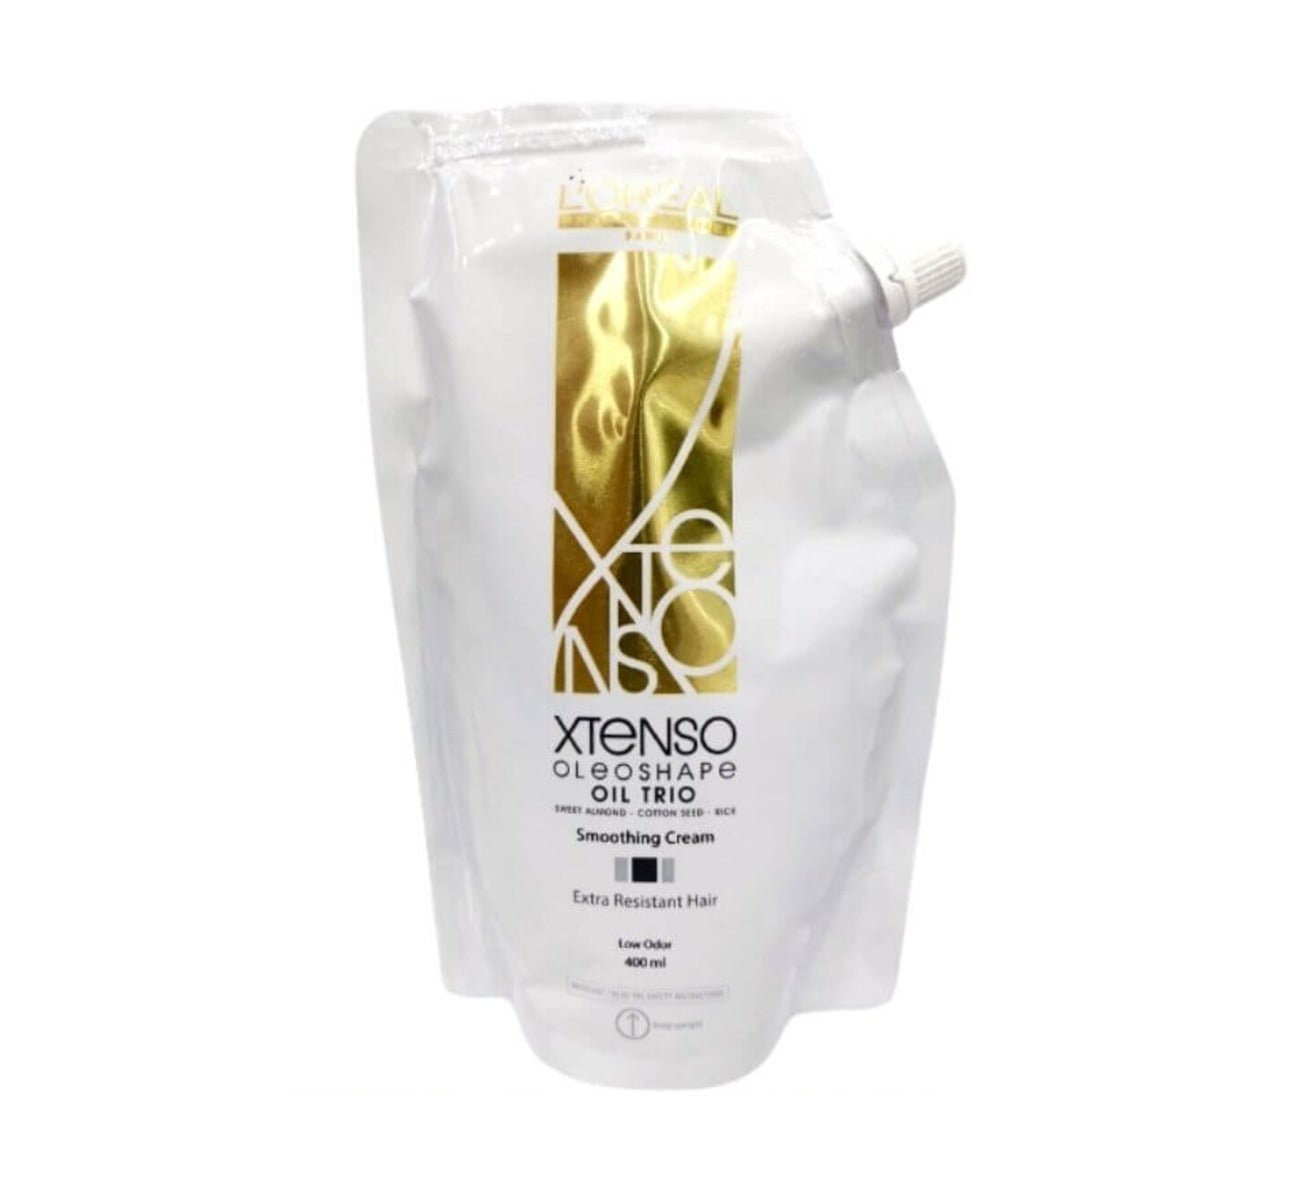 Loreal Professional Oil Trio Xtenso Smoothing Cream For Normal Hair 400Ml - AllurebeautypkLoreal Professional Oil Trio Xtenso Smoothing Cream For Normal Hair 400Ml